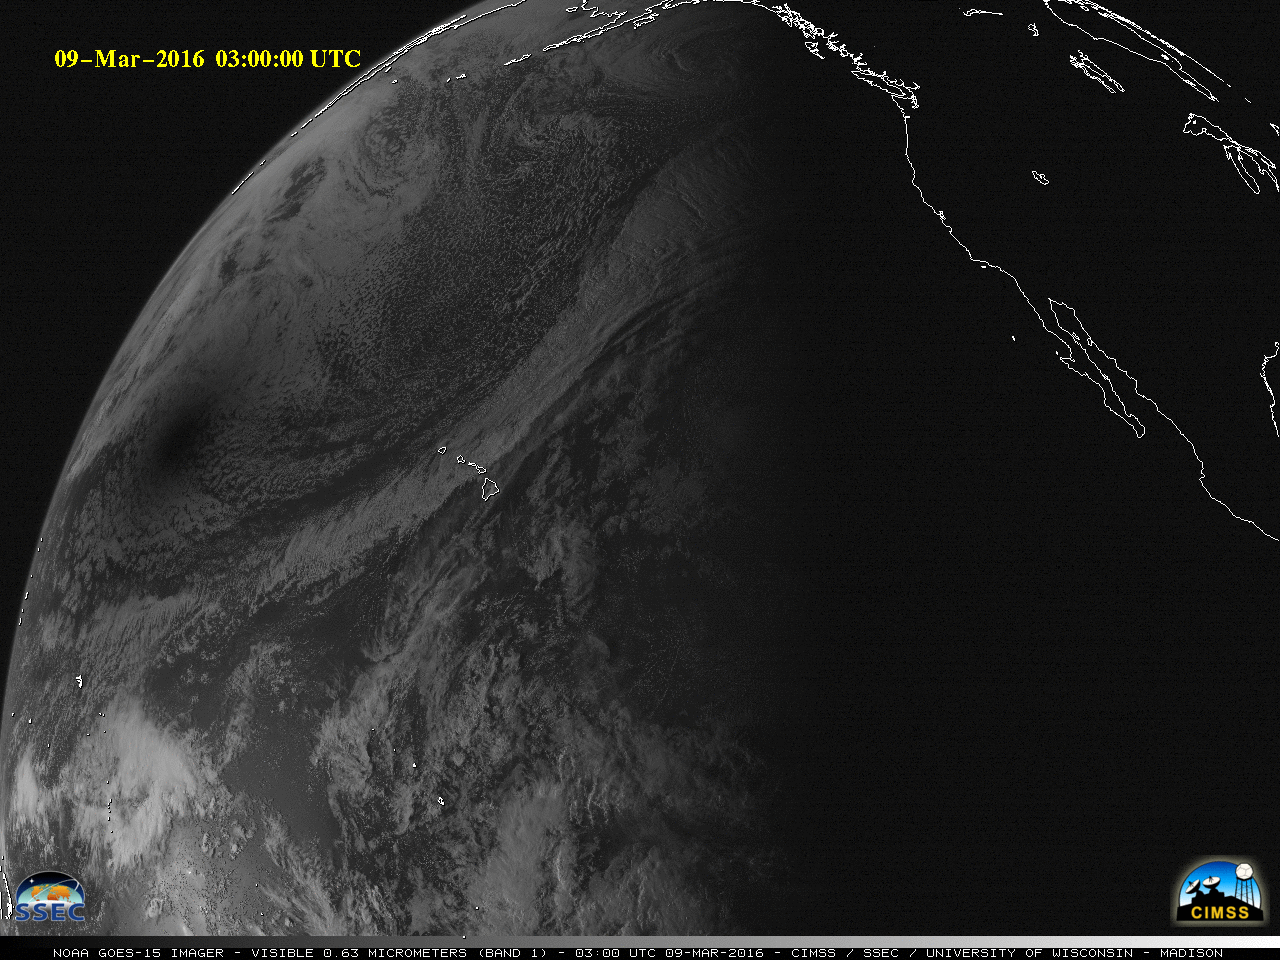 GOES-15 Visible (0.63 um) images [click to play animation]